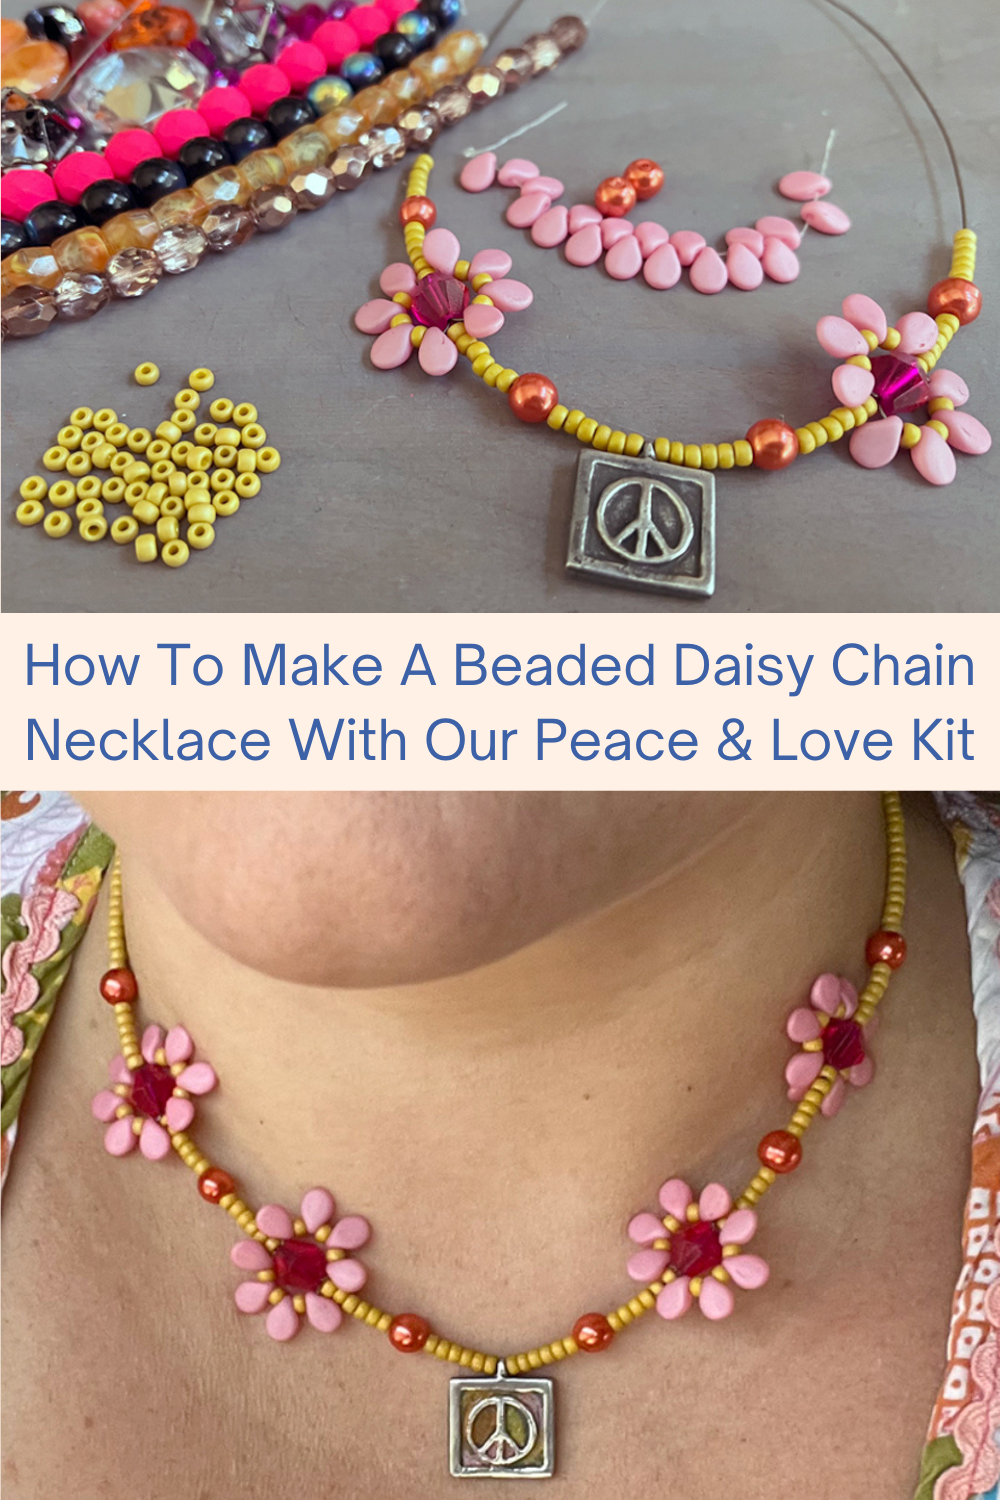 How To Make A Beaded Daisy Chain Necklace With Our Peace & Love Kit Collage